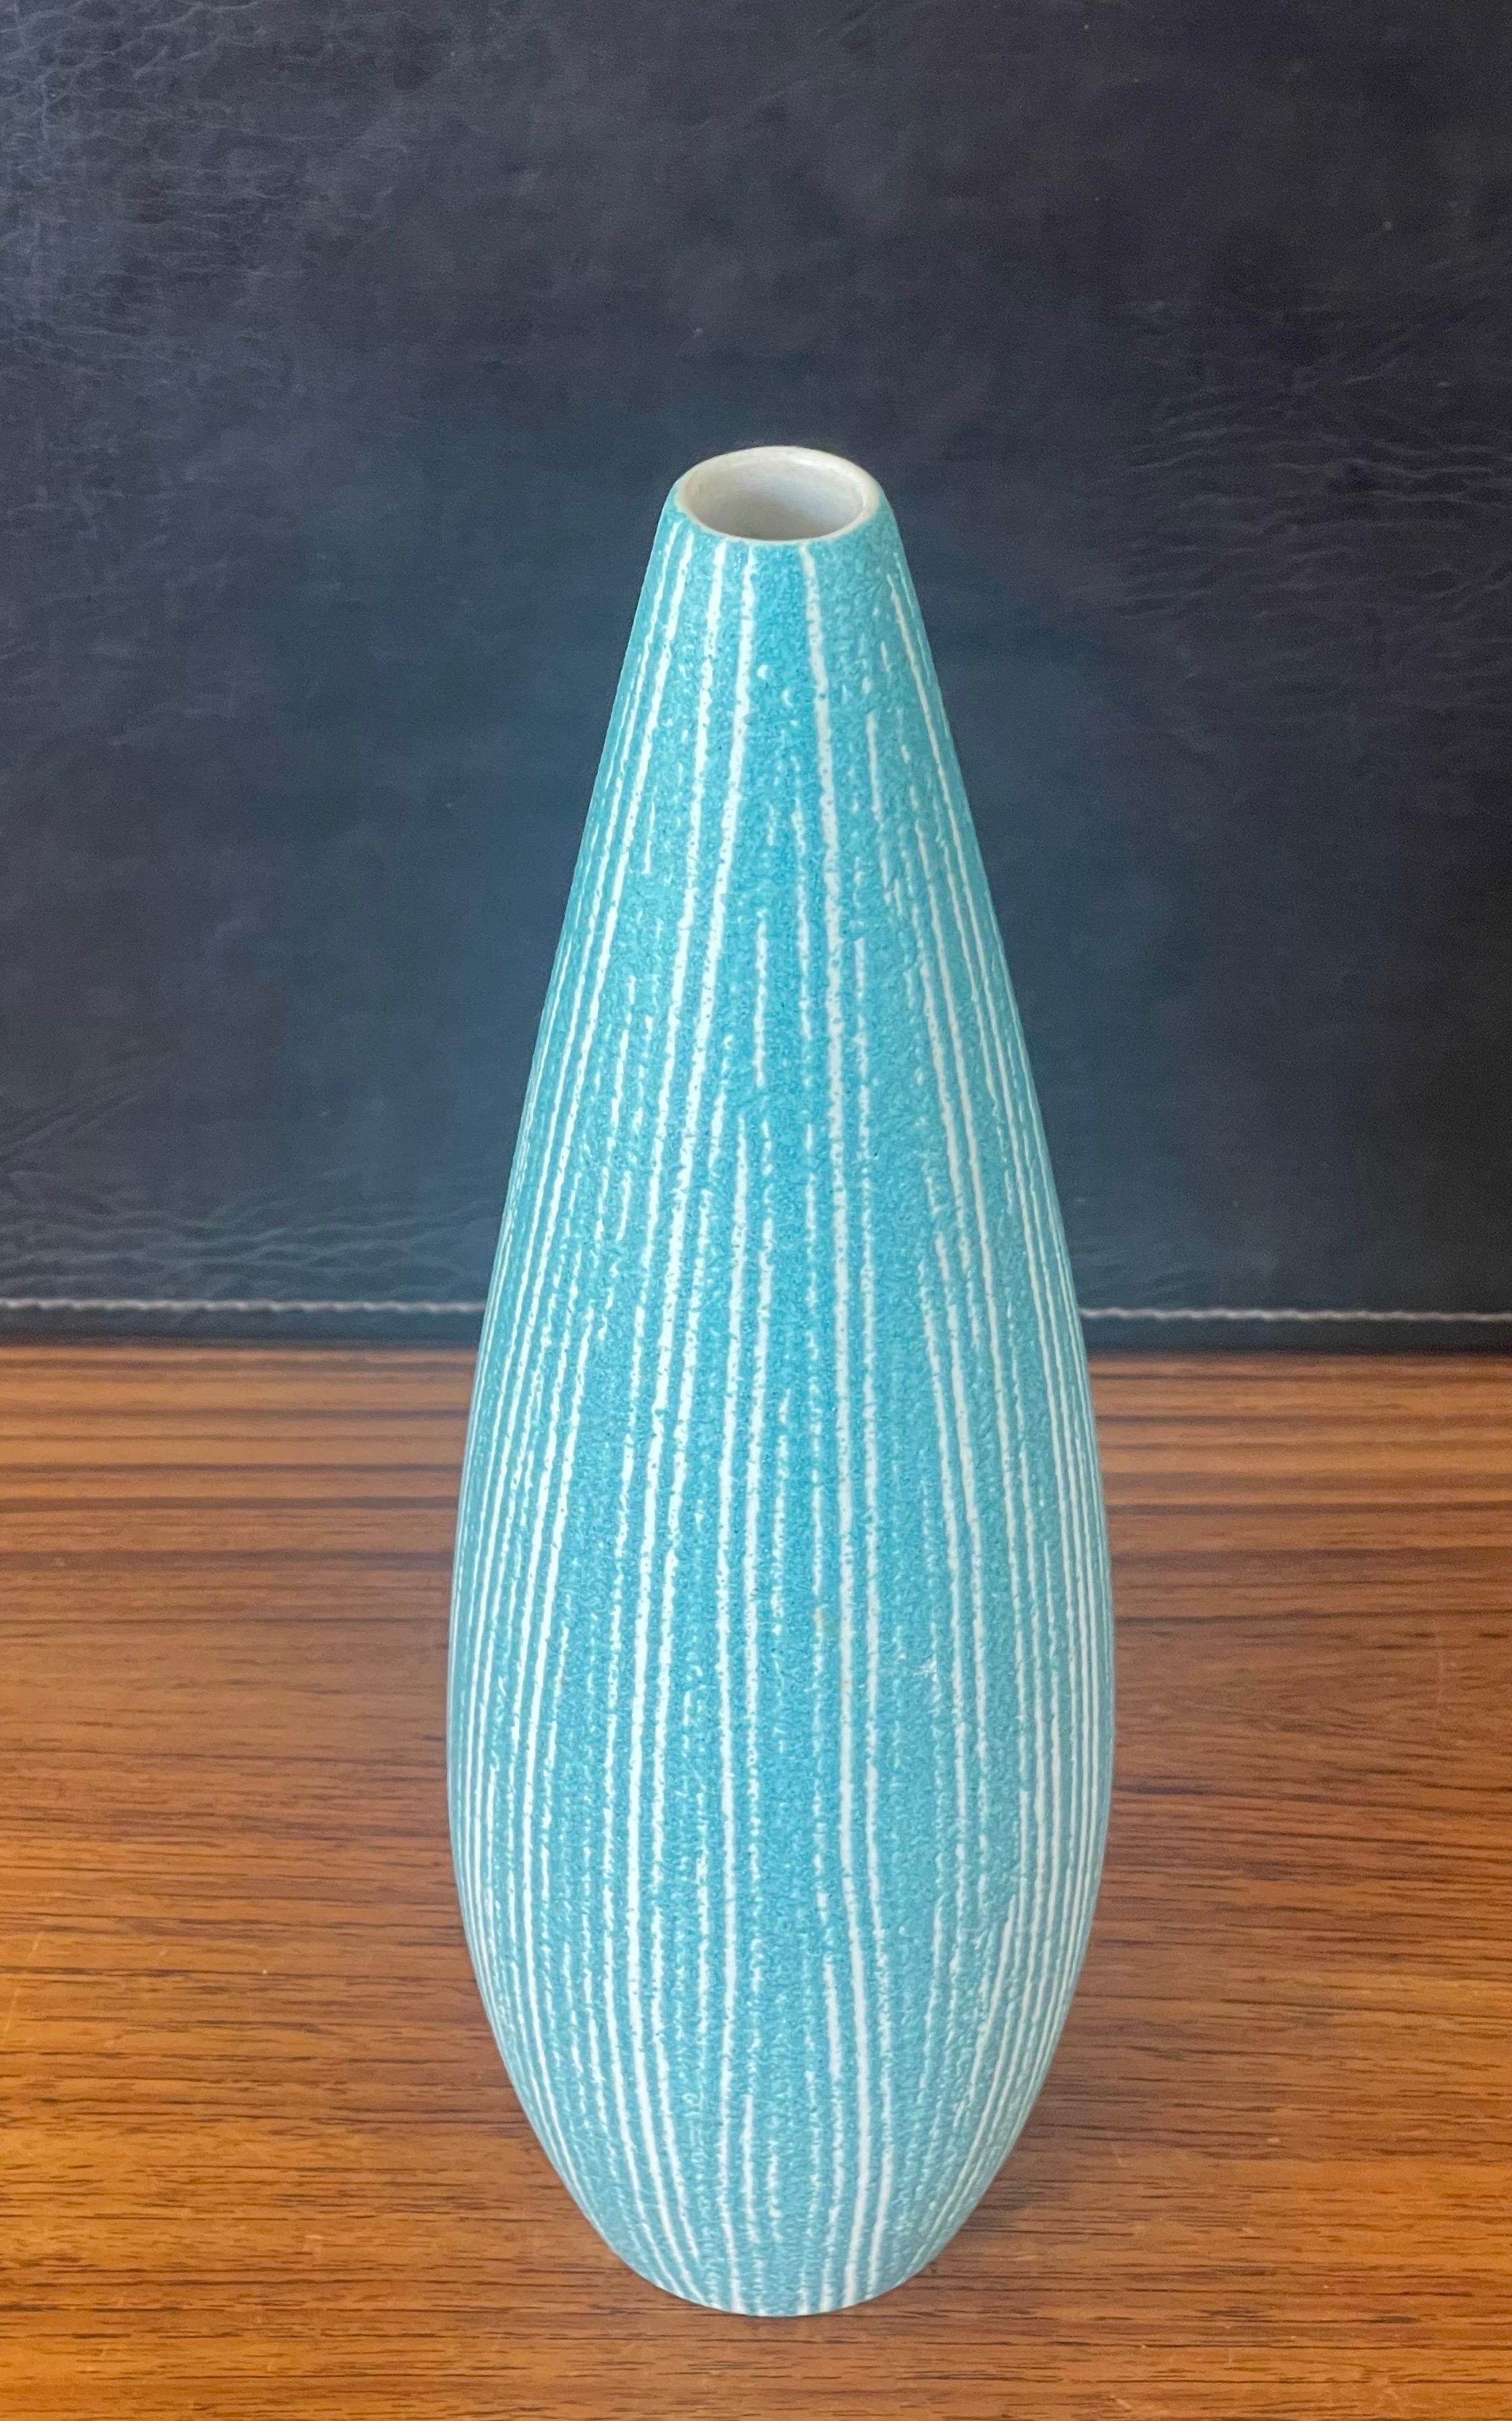 A very fun MCM powder blue ceramic vase by Hyalyn, circa 1960s. The vase is made of ceramic and is in very good condition with no chips or cracks; it measures 4